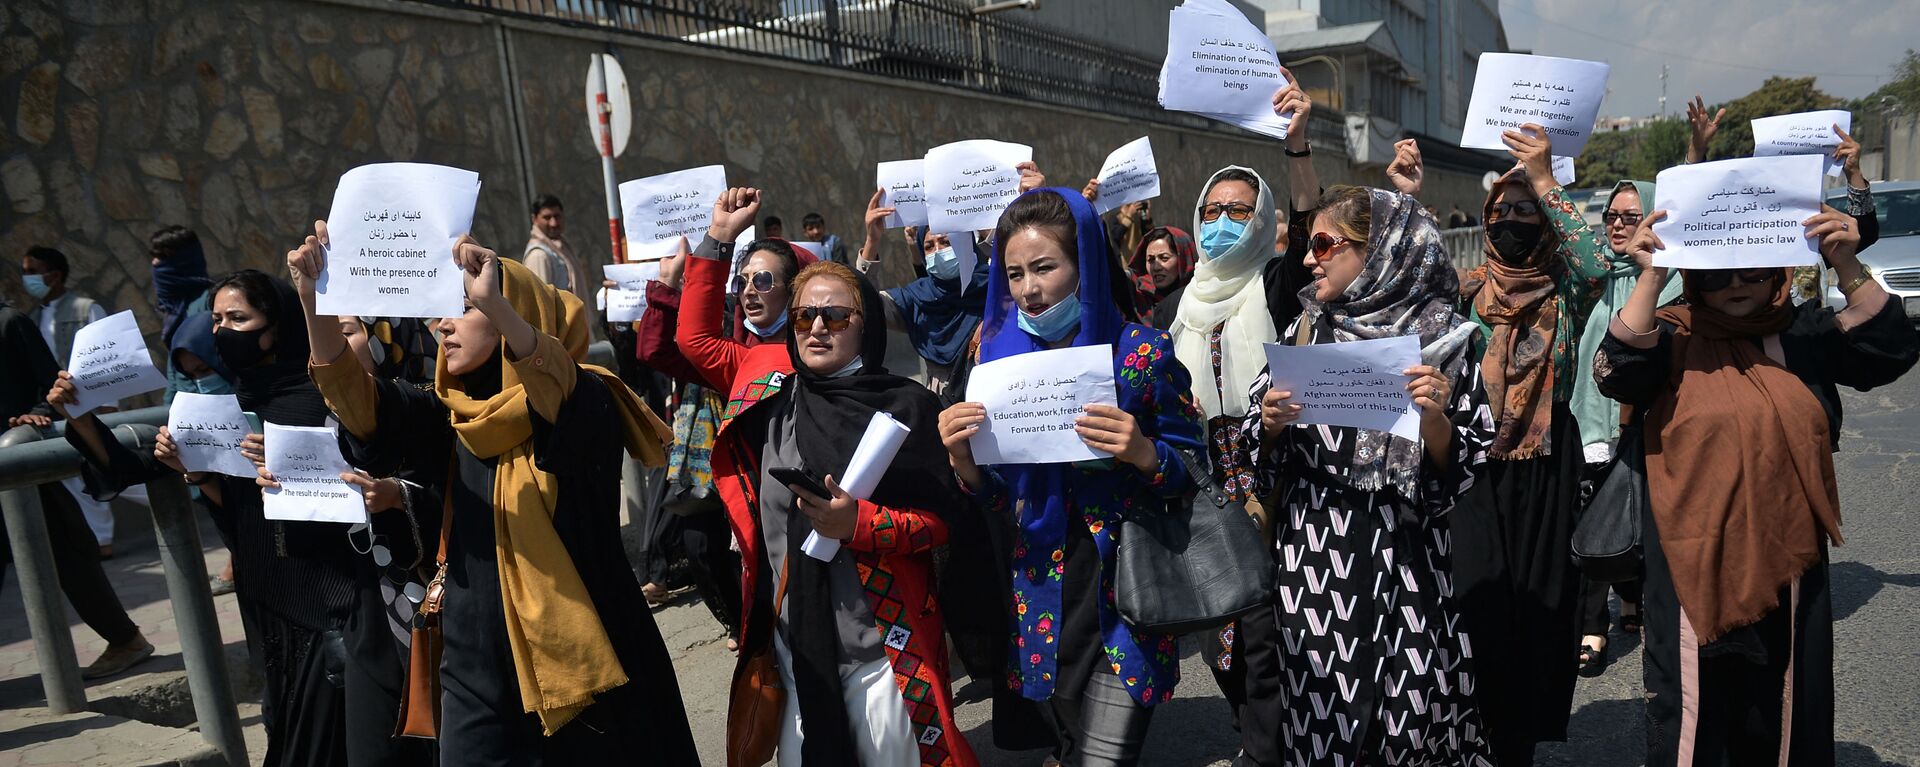 Afghan women take part in a protest march for their rights under the Taliban rule in the downtown area of Kabul on September 3, 2021.  - Sputnik International, 1920